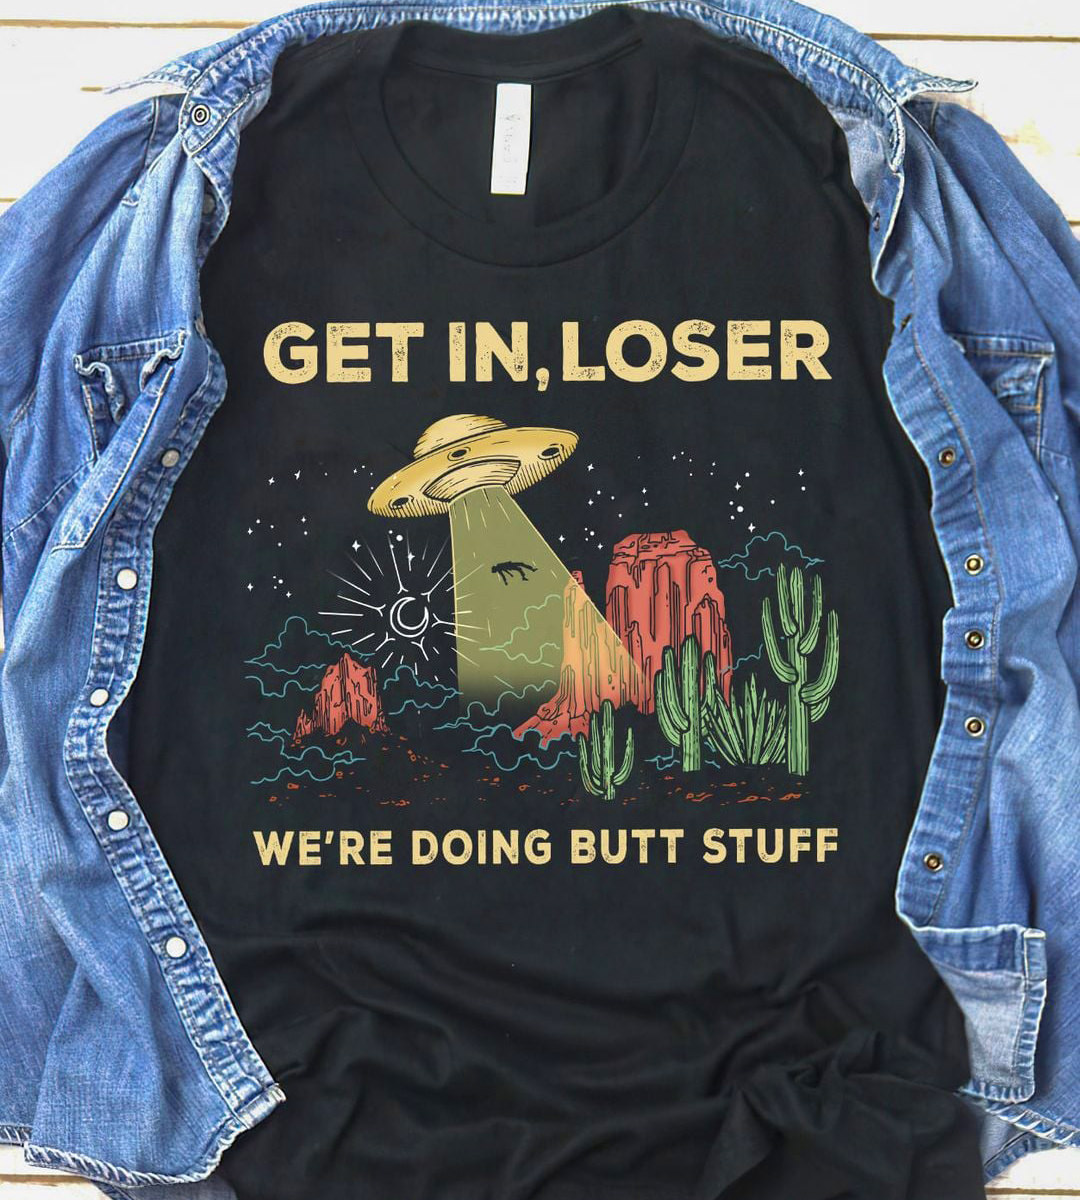 A T-shirt showing a human being beamed aboard a flying saucer saying GET IN, LOSER — WE'RE DOING BUTT STUFF!